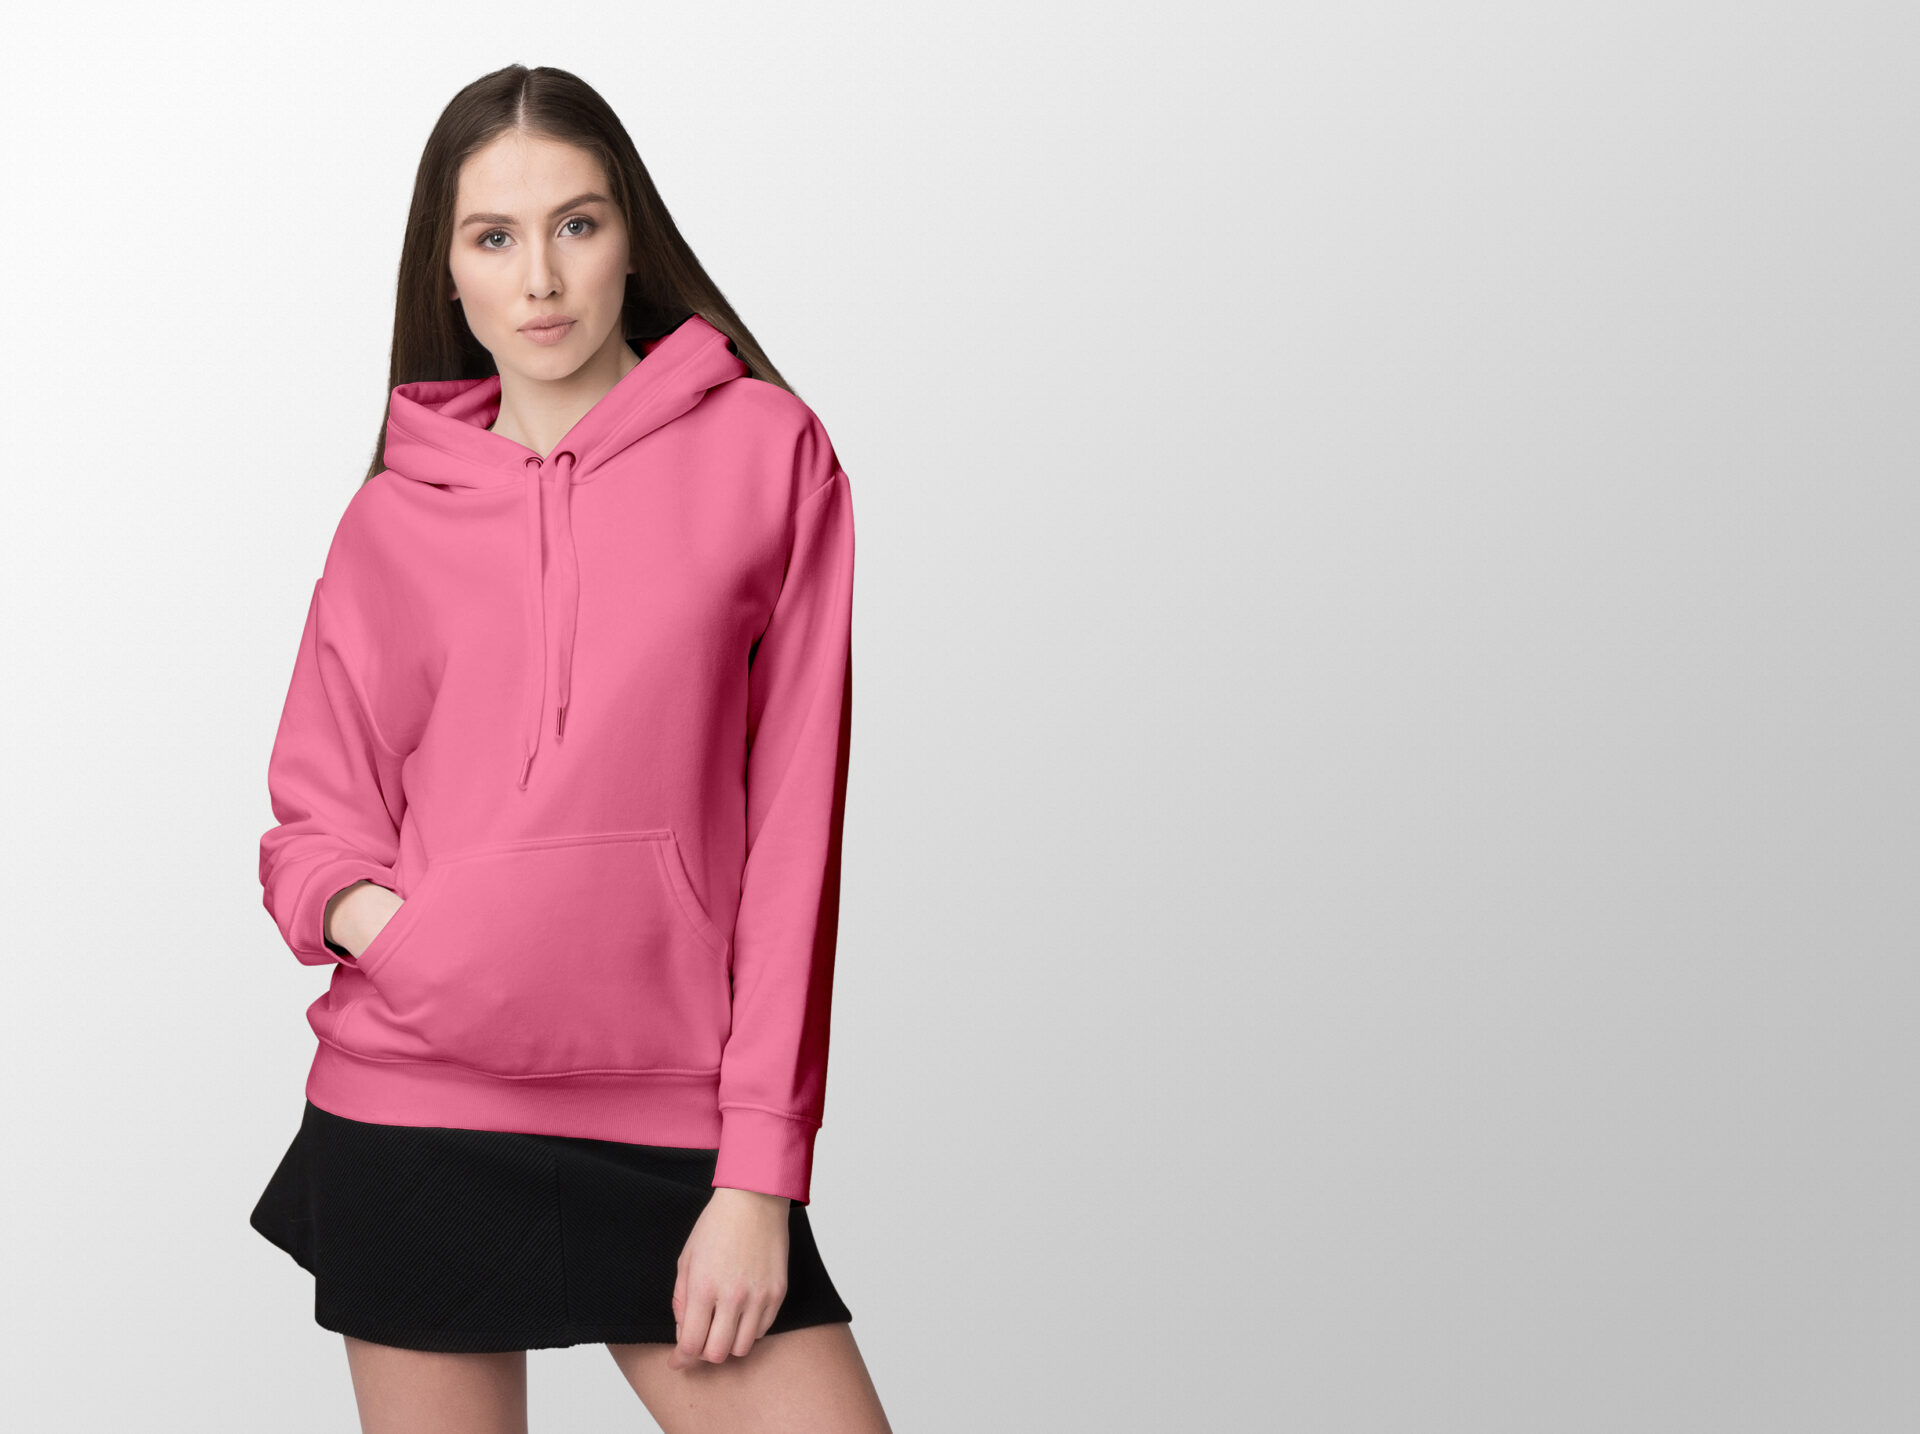 Hoodies-And-Short-Skirts